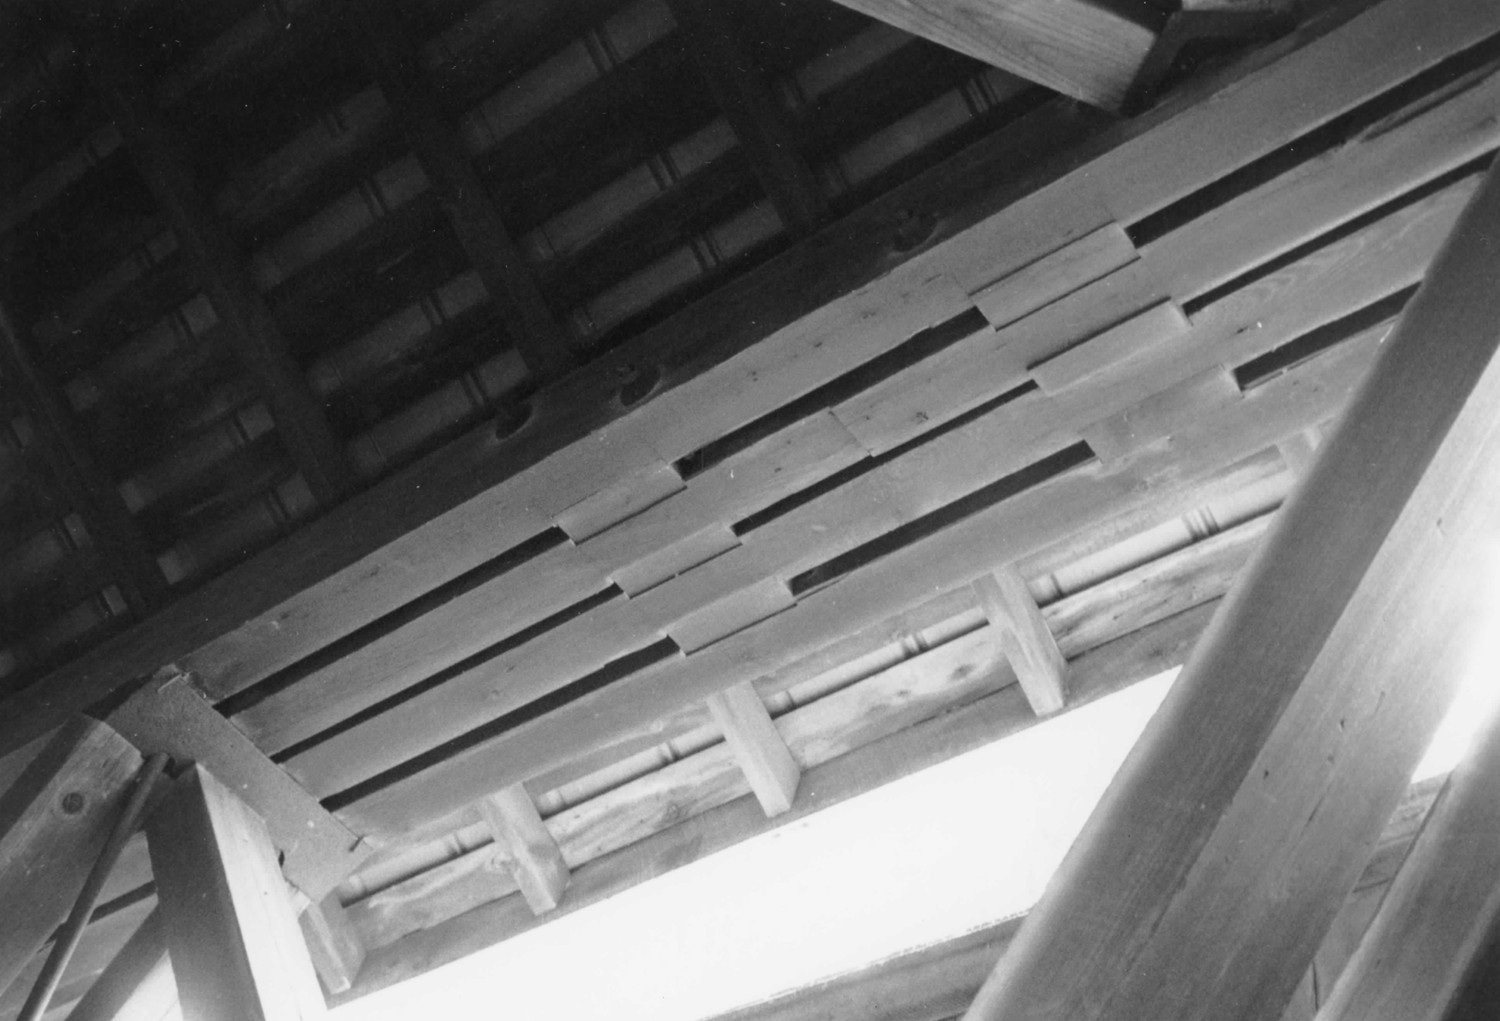 Ceylon Covered Bridge, Geneva Indiana View of upper chord timber splice on south upper chord (2005)